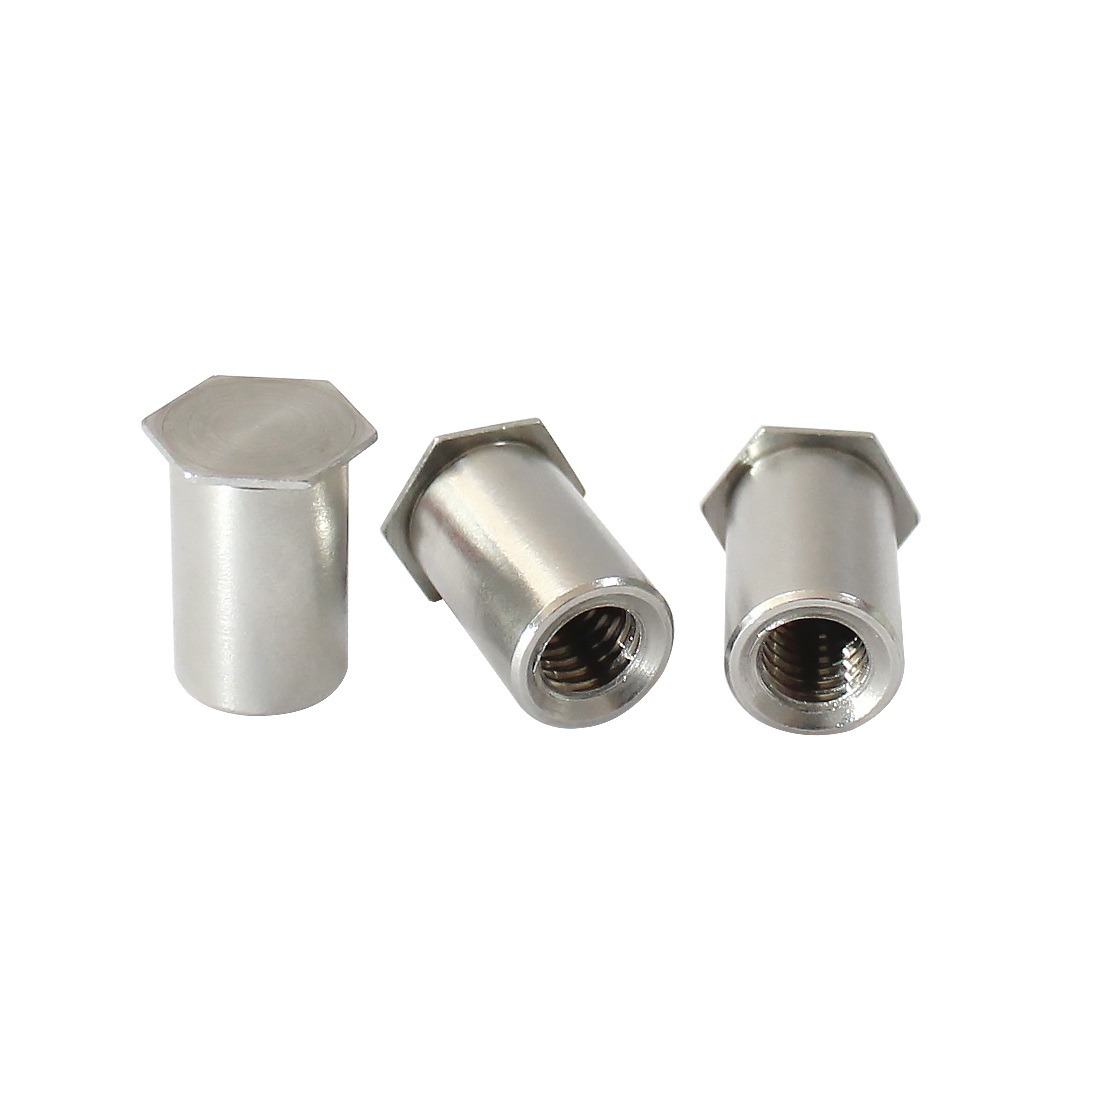 M3 M4 M5 Stainless Steel 304 BSOS Self-clinching Standoffs Blind Hole Threaded